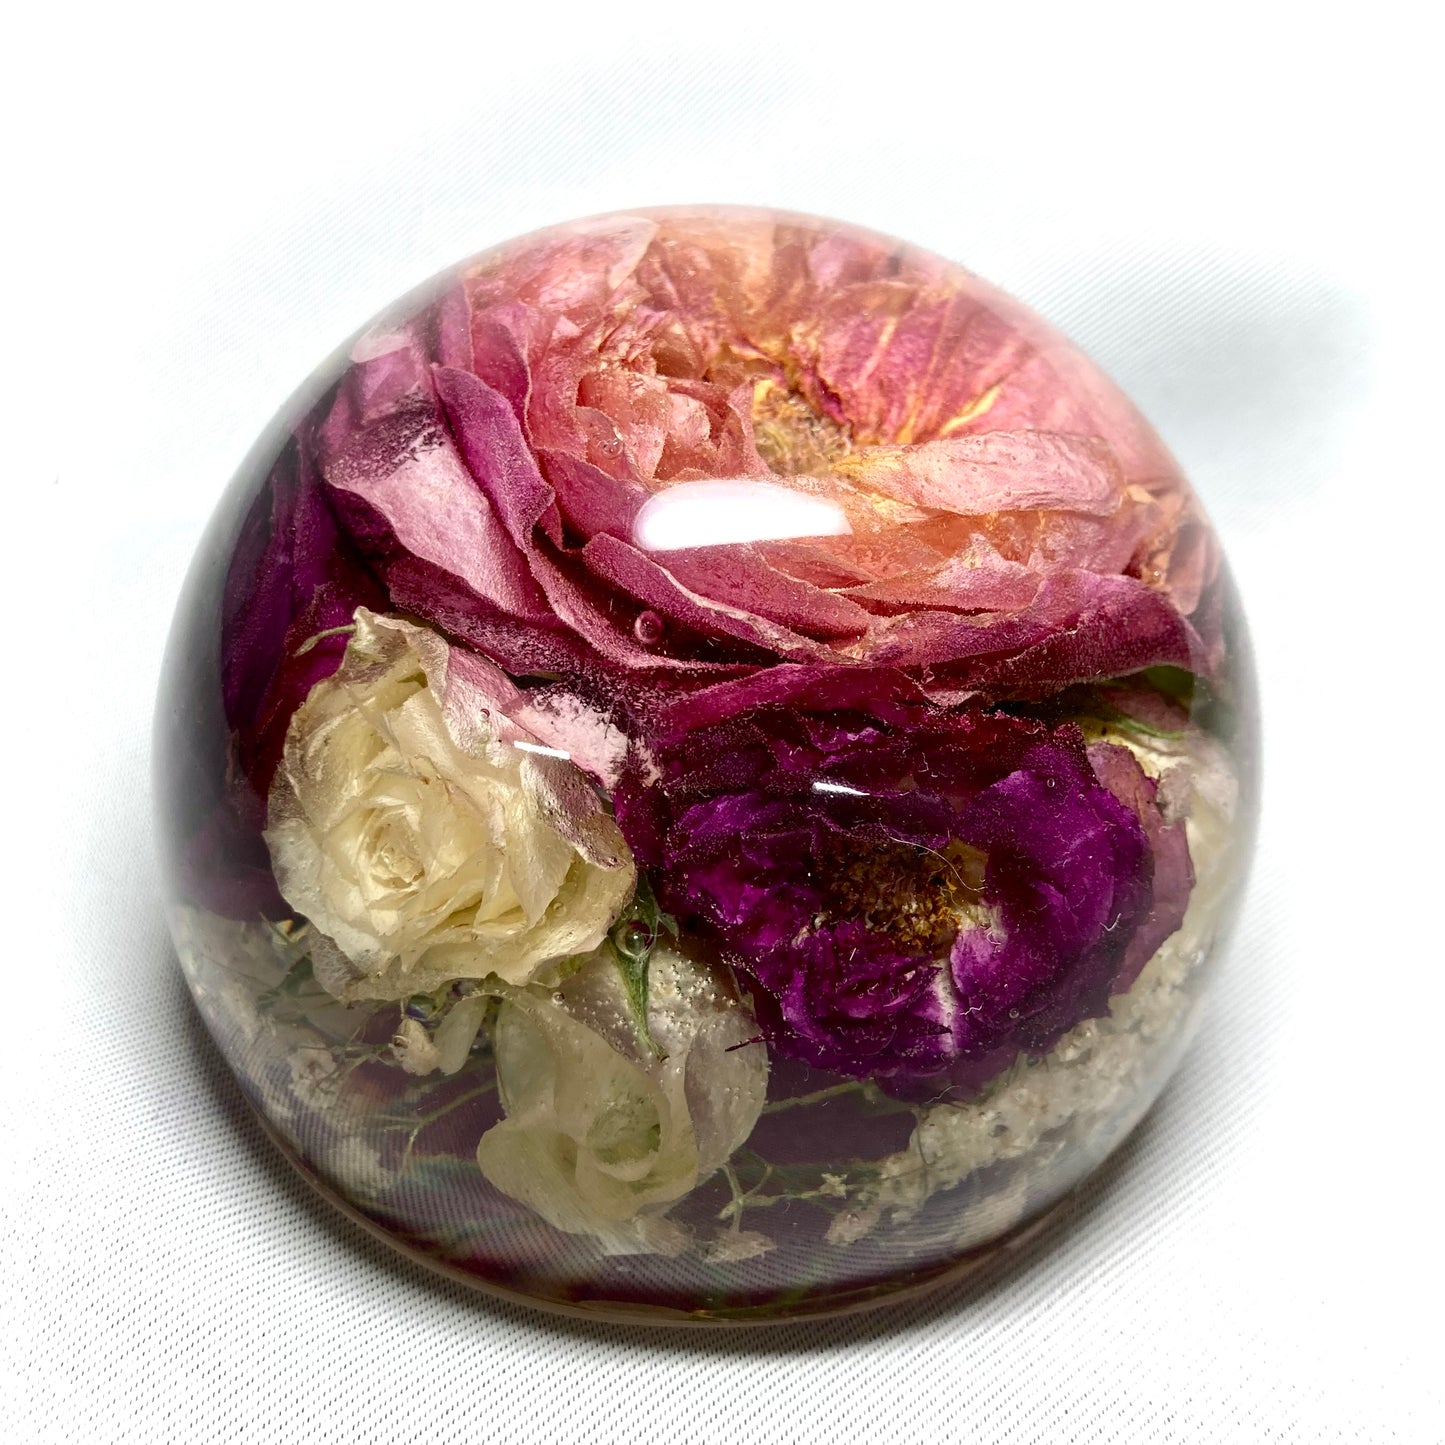 11cm flat bottom sphere containing a mixture of pink and white spray roses, large peach variegated rose, gypsophila and foliage